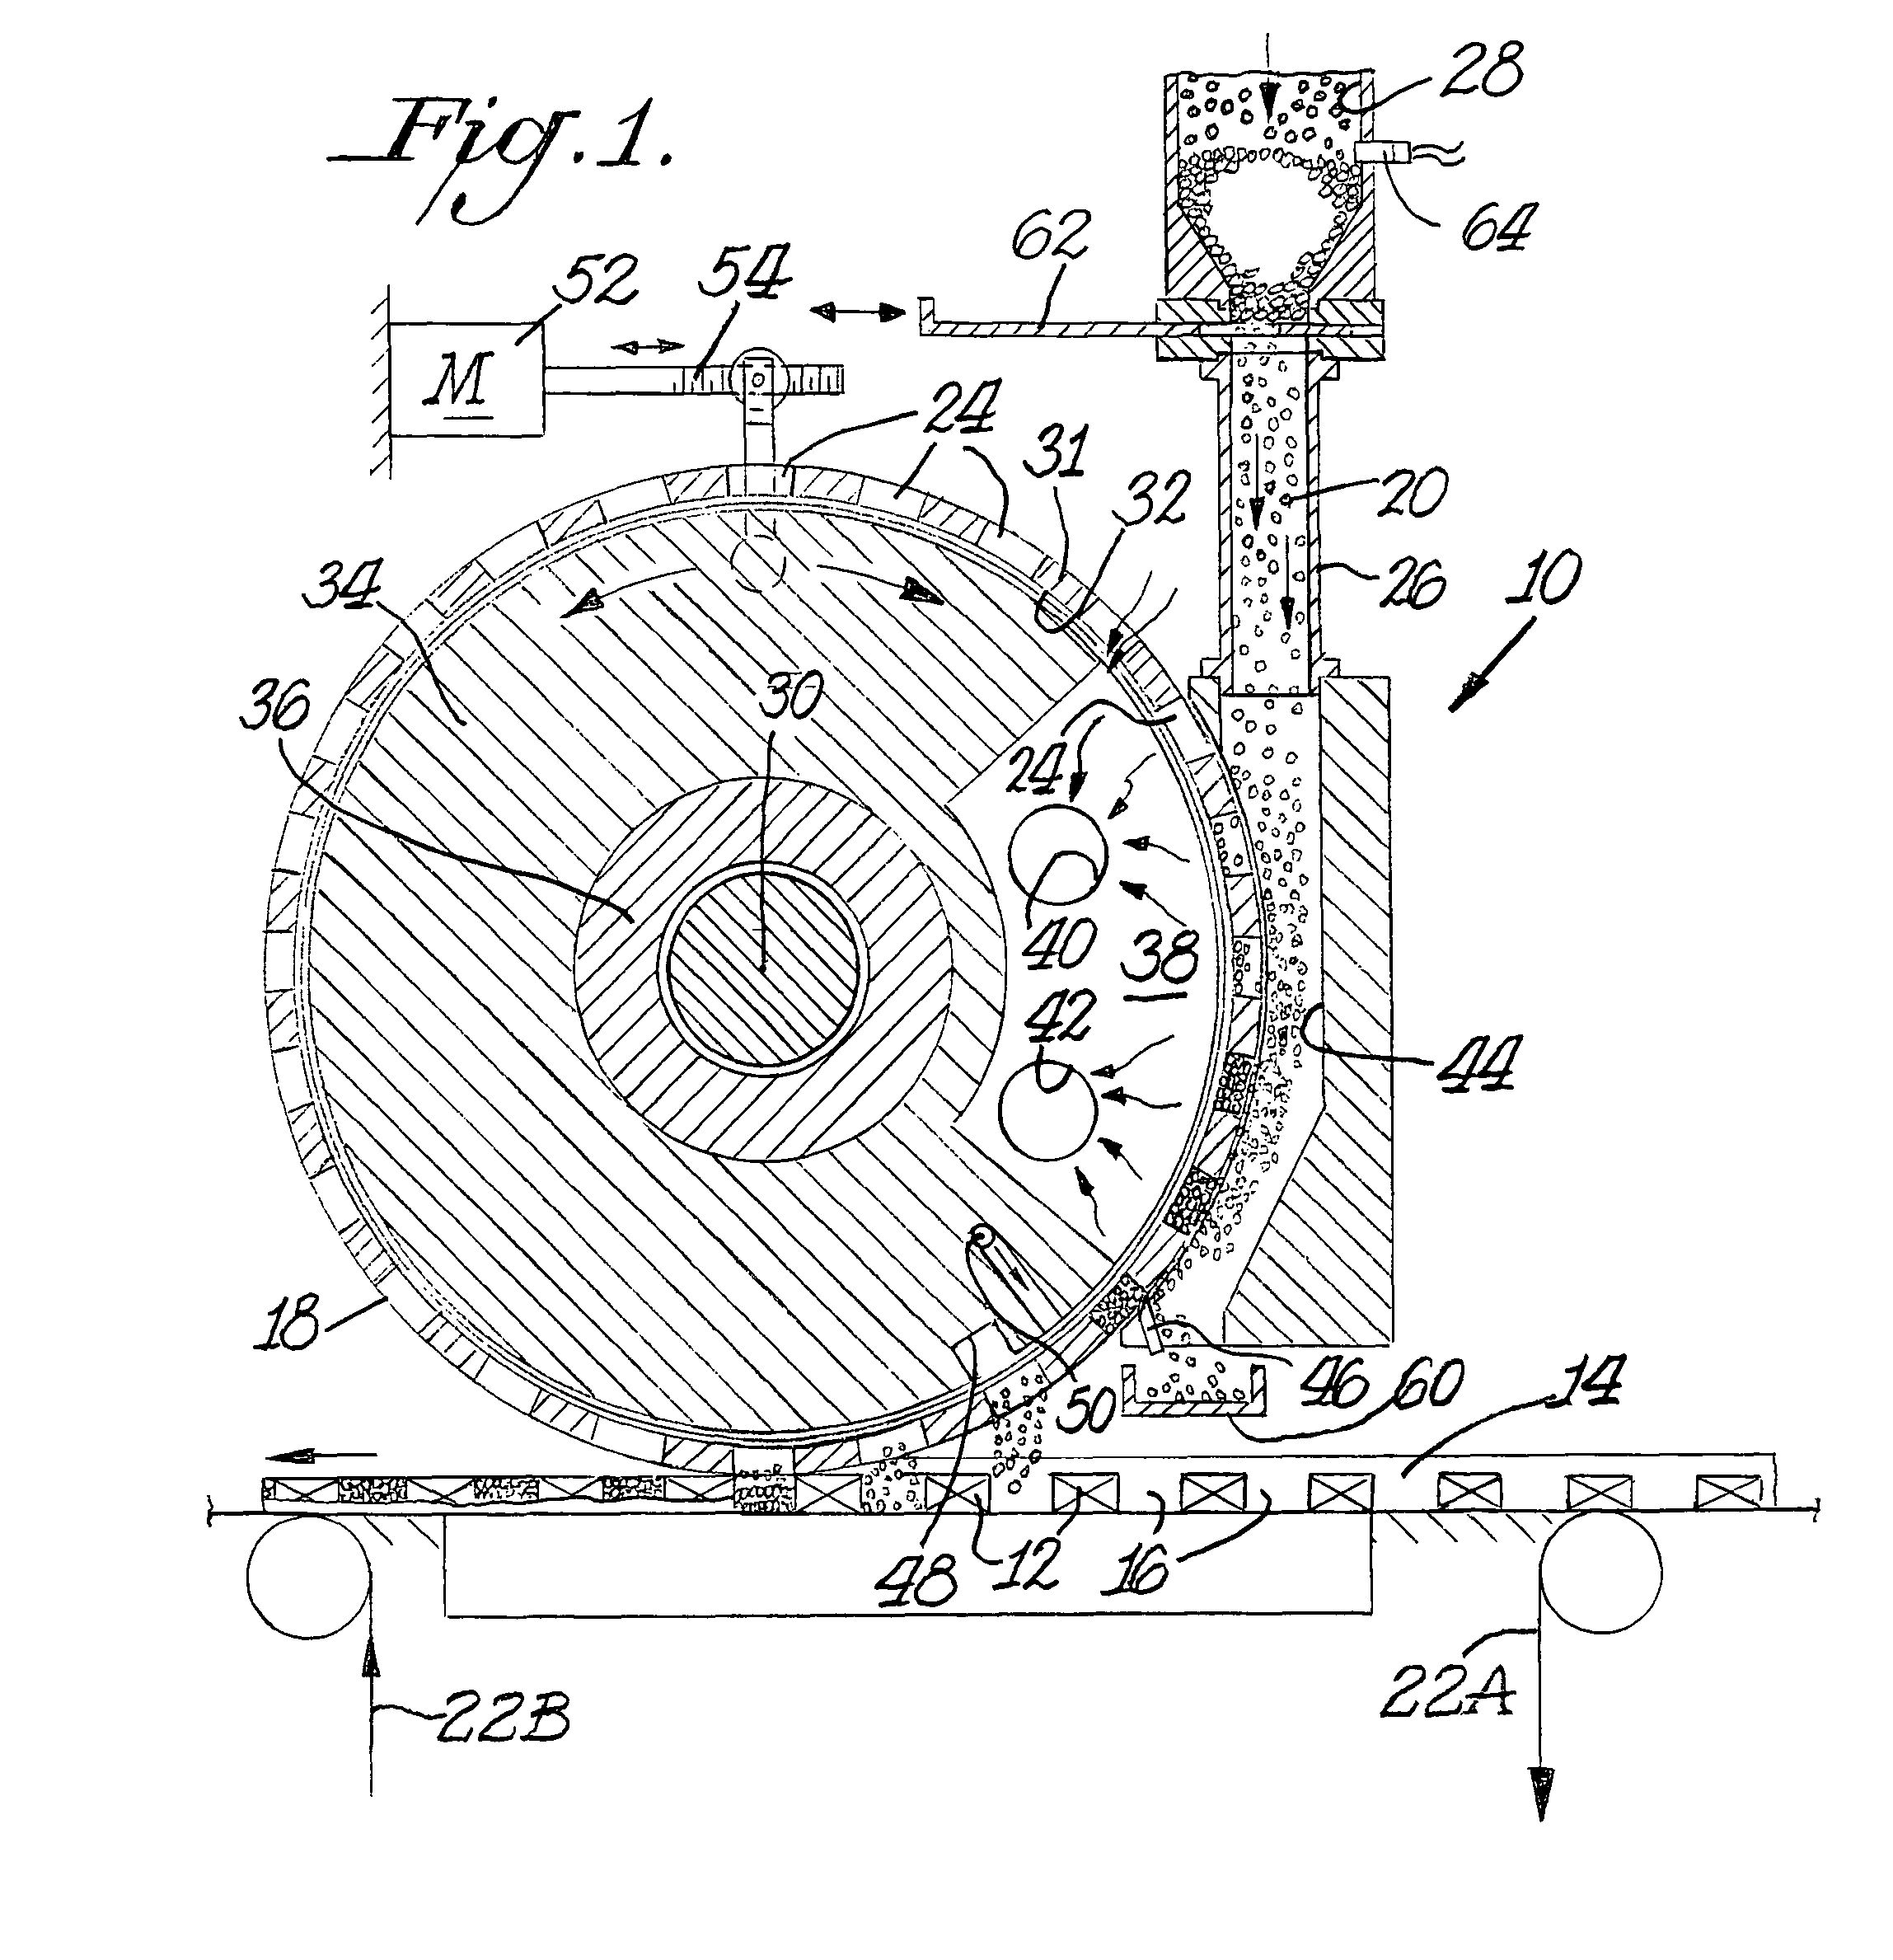 Applicator wheel for filling cavities with metered amounts of particulate material